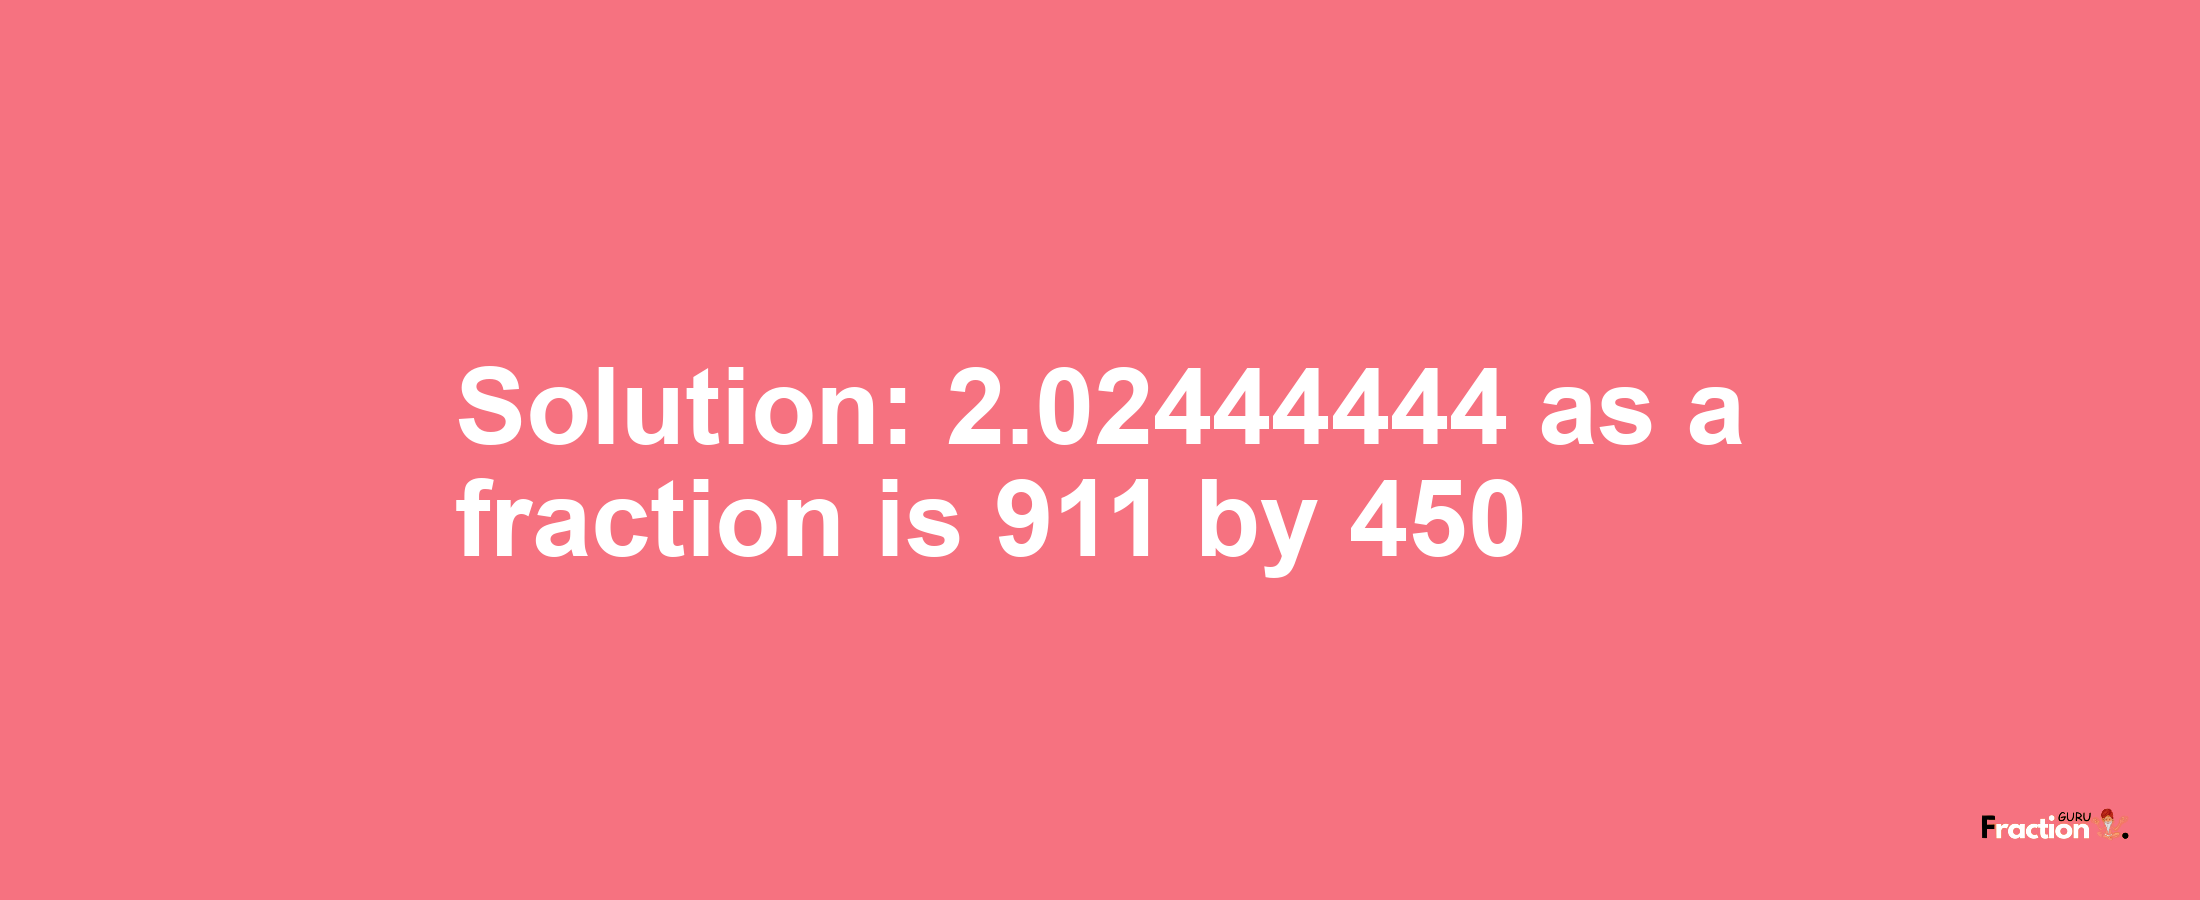 Solution:2.02444444 as a fraction is 911/450